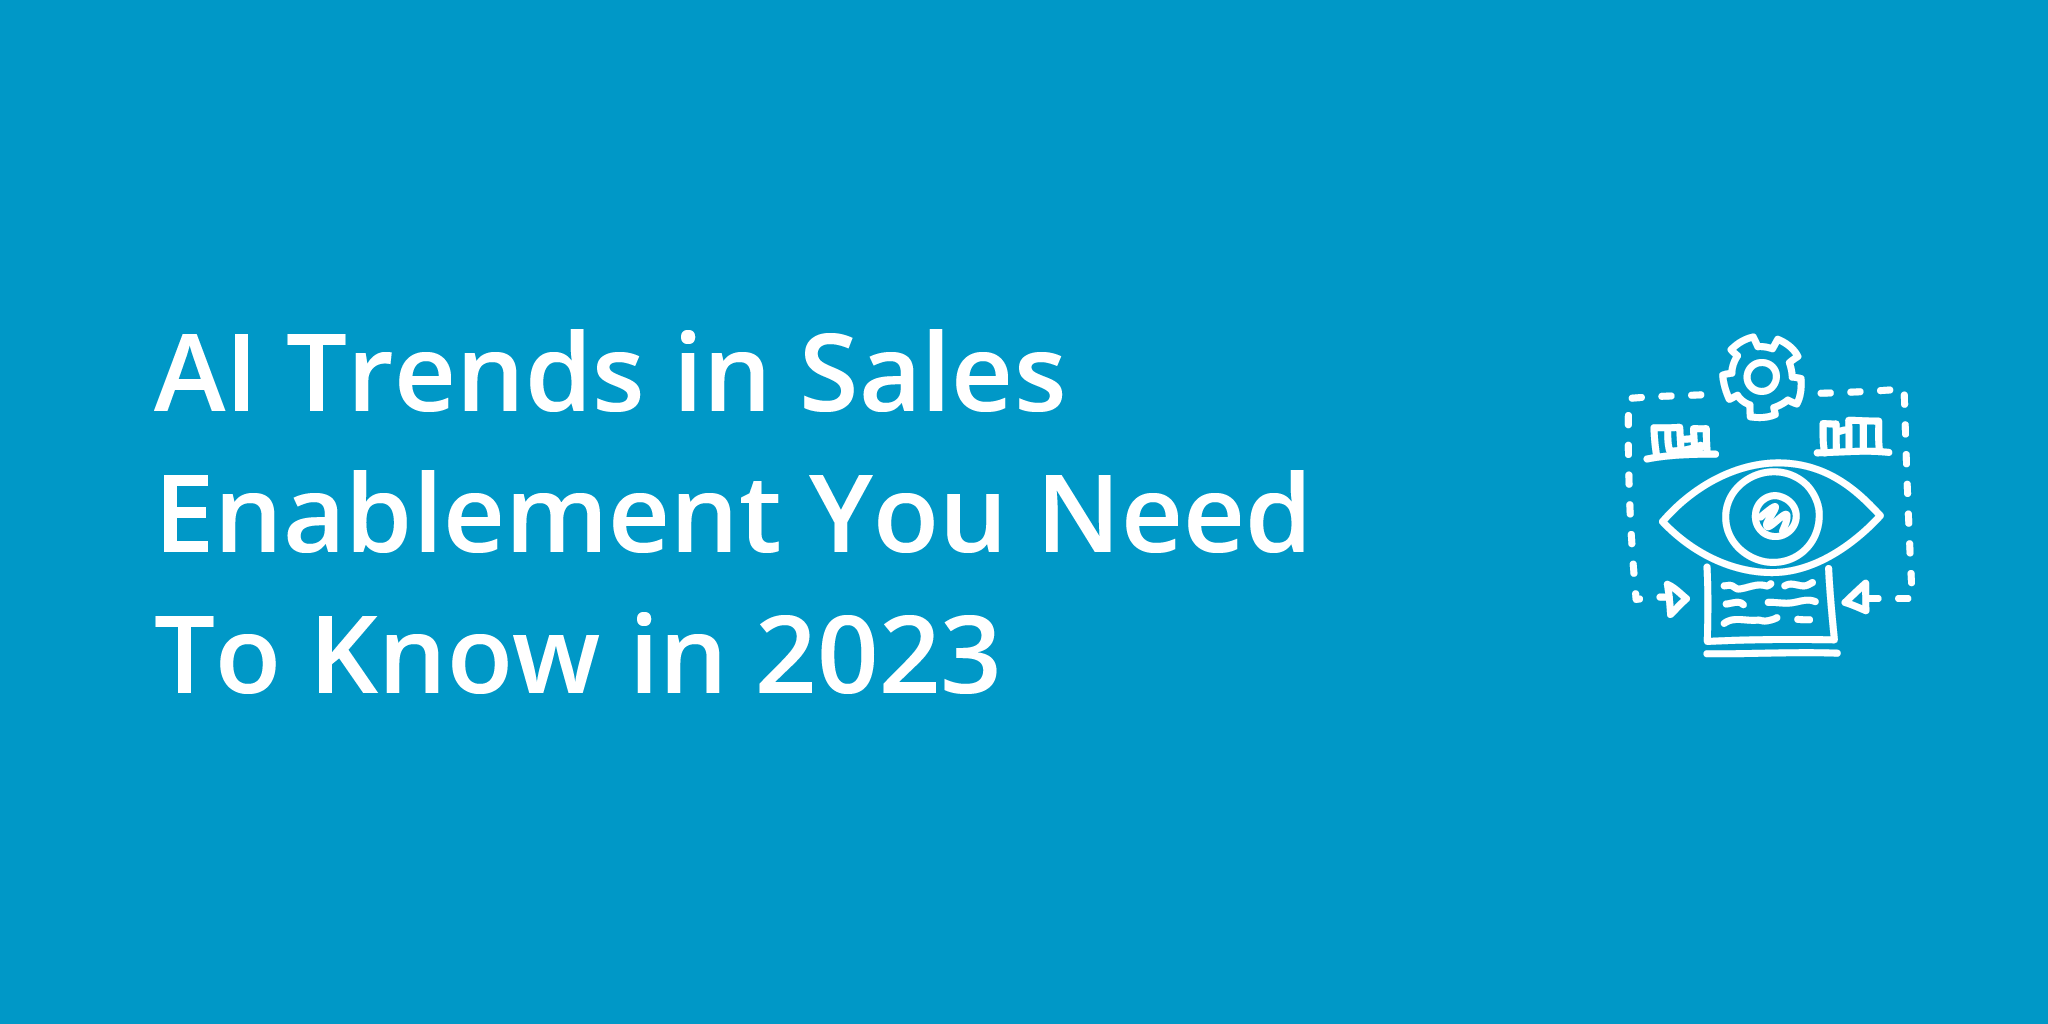 AI Trends in Sales Enablement You Need To Know in 2023 | Telephones for business